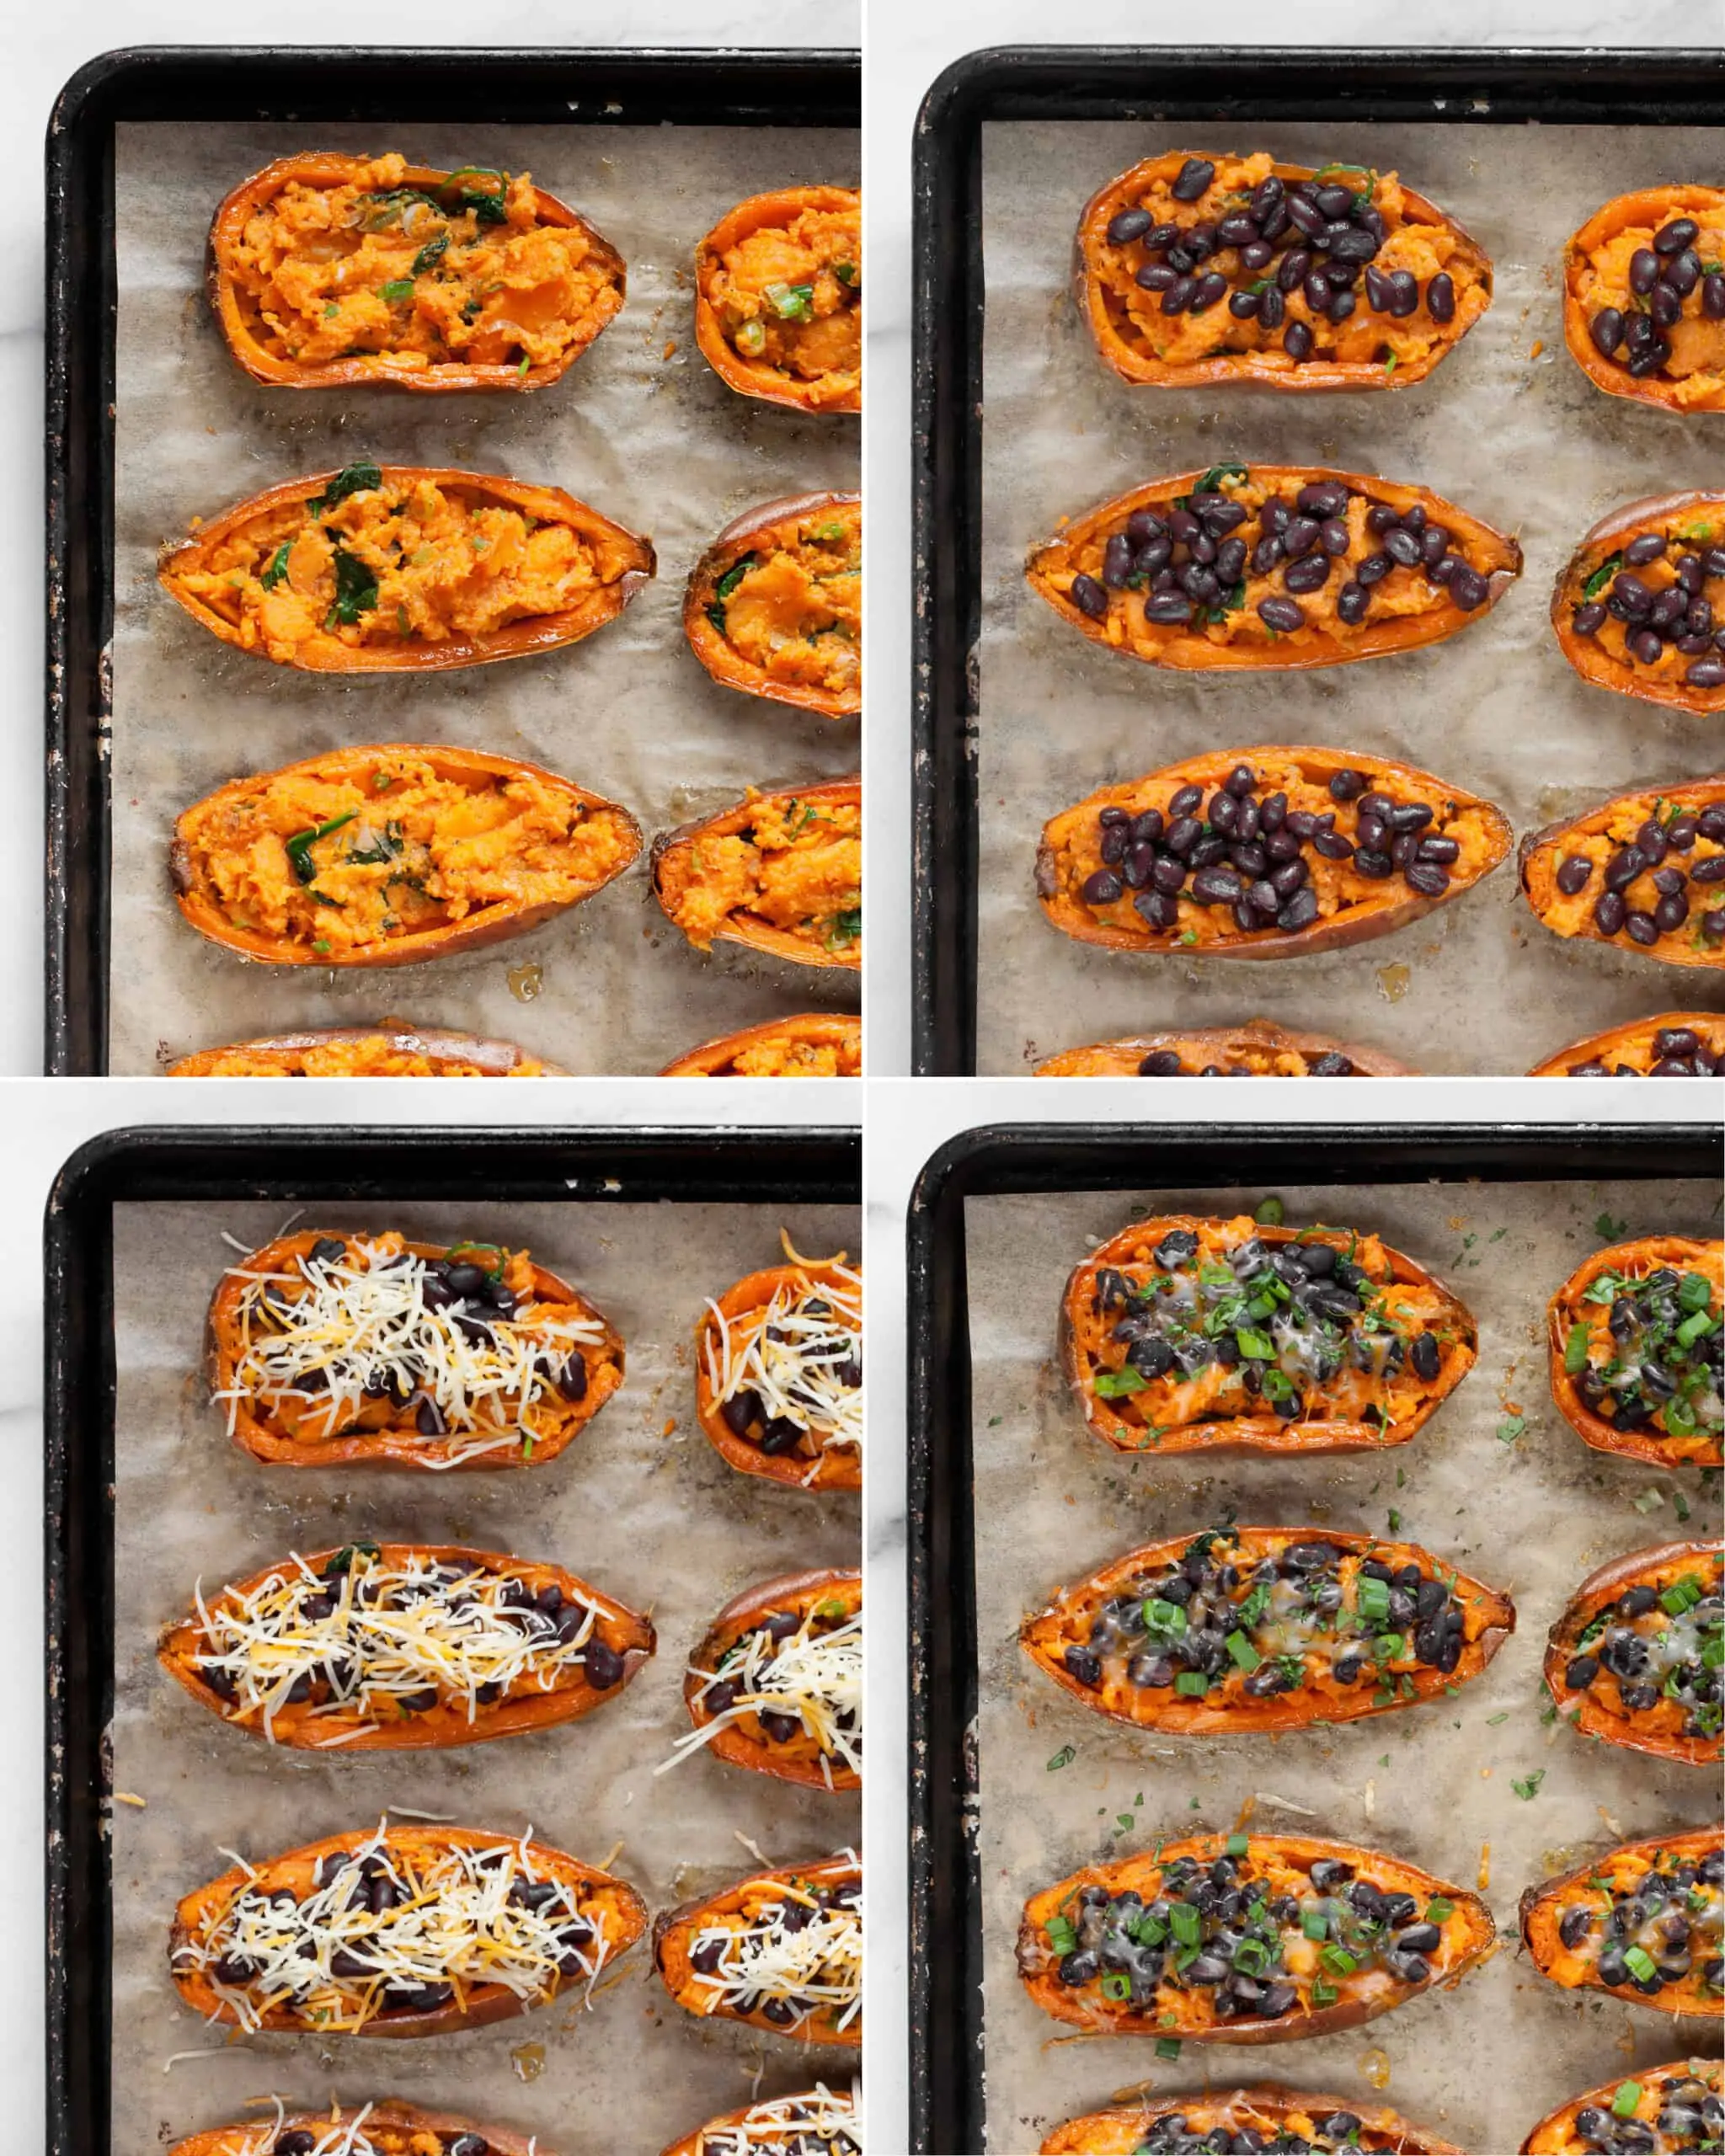 Steps showing how to assemble sweet potatoes including spooning in the filling, topping with black beans and cheese